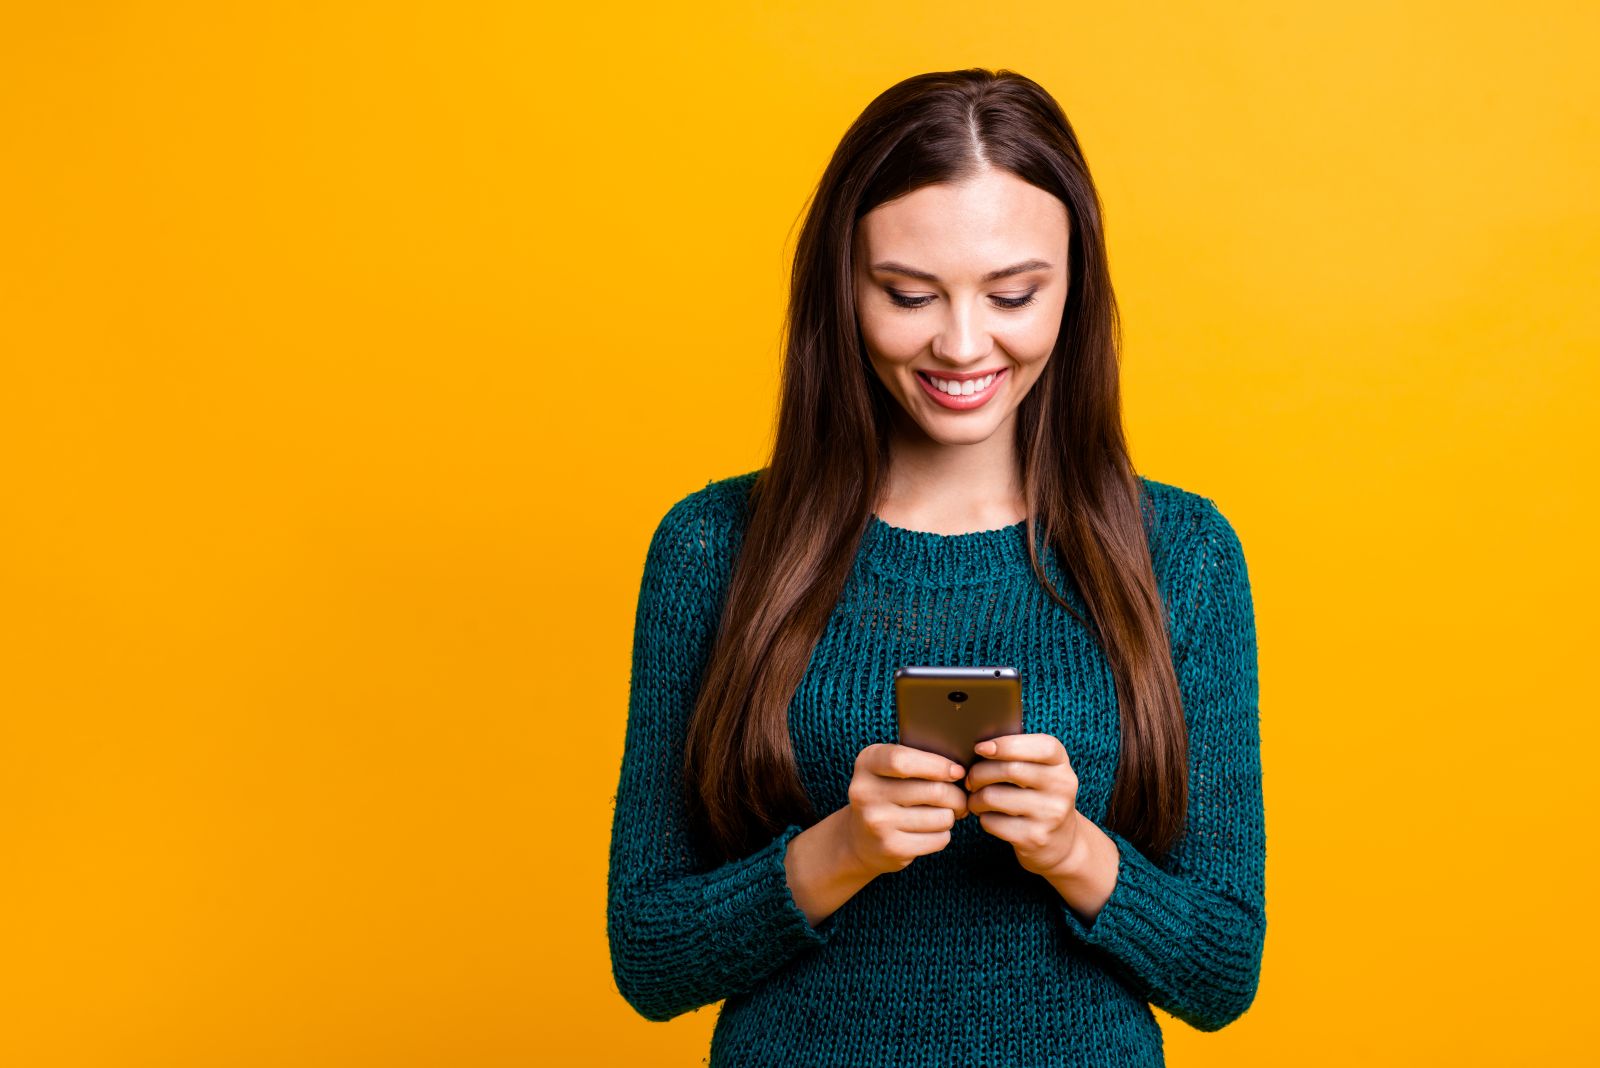 Young female respondent testing an app (standing against a bright yellow background)